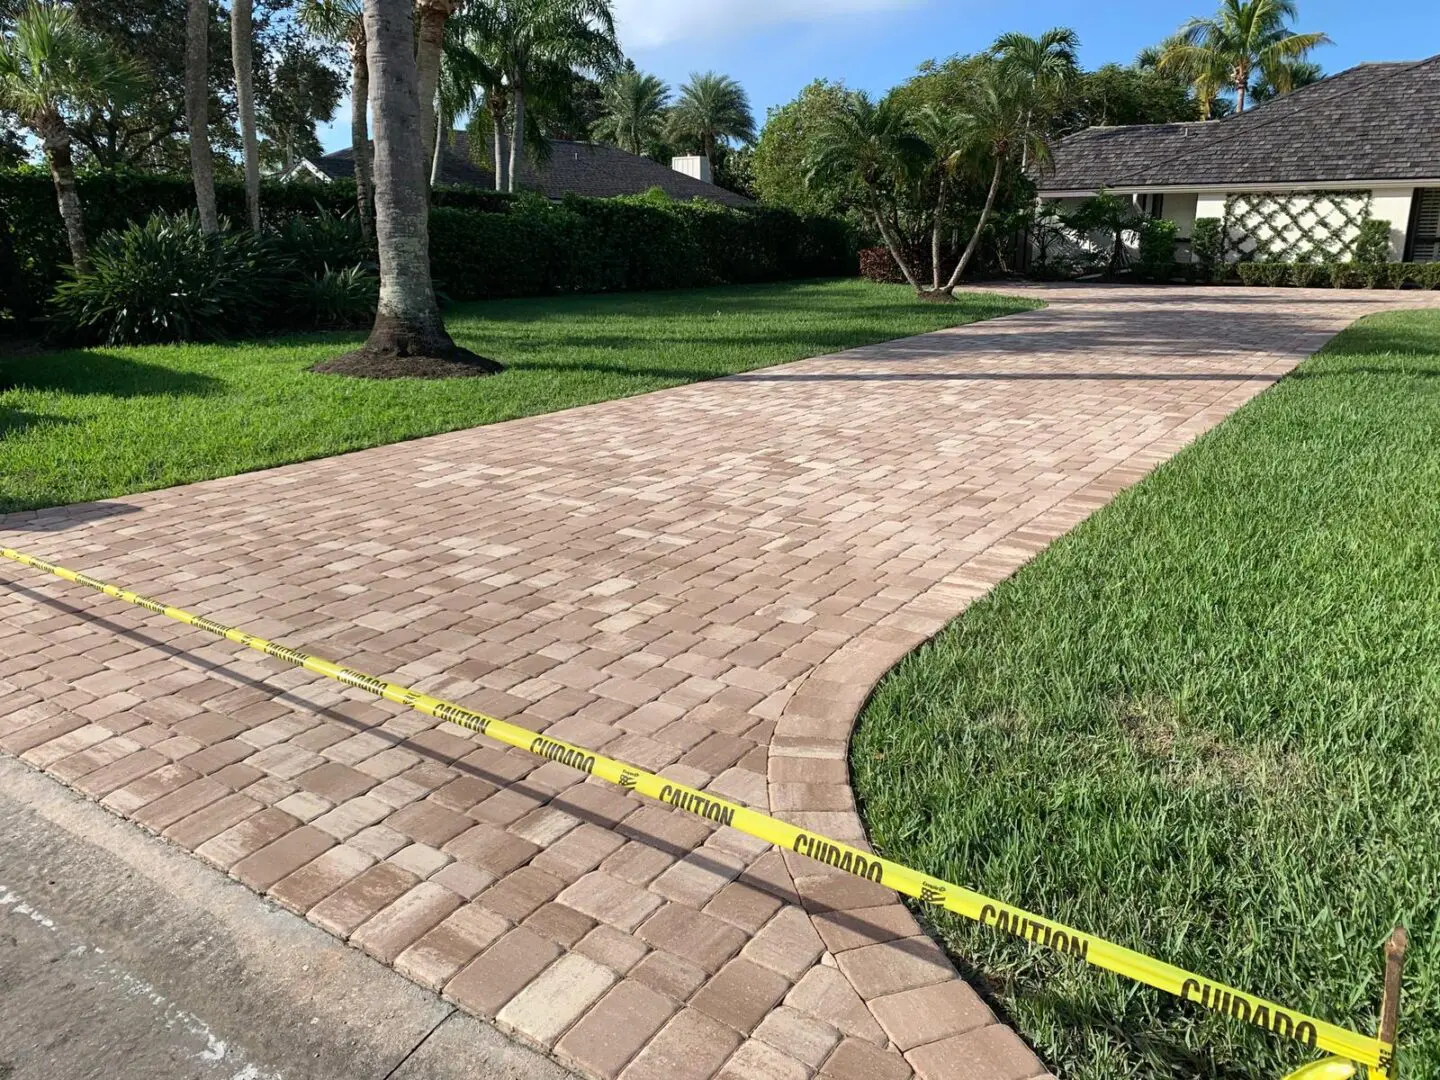 Brick driveway cordoned off with yellow caution tape, leading to a house surrounded by greenery, palm trees, and a cloudy sky.